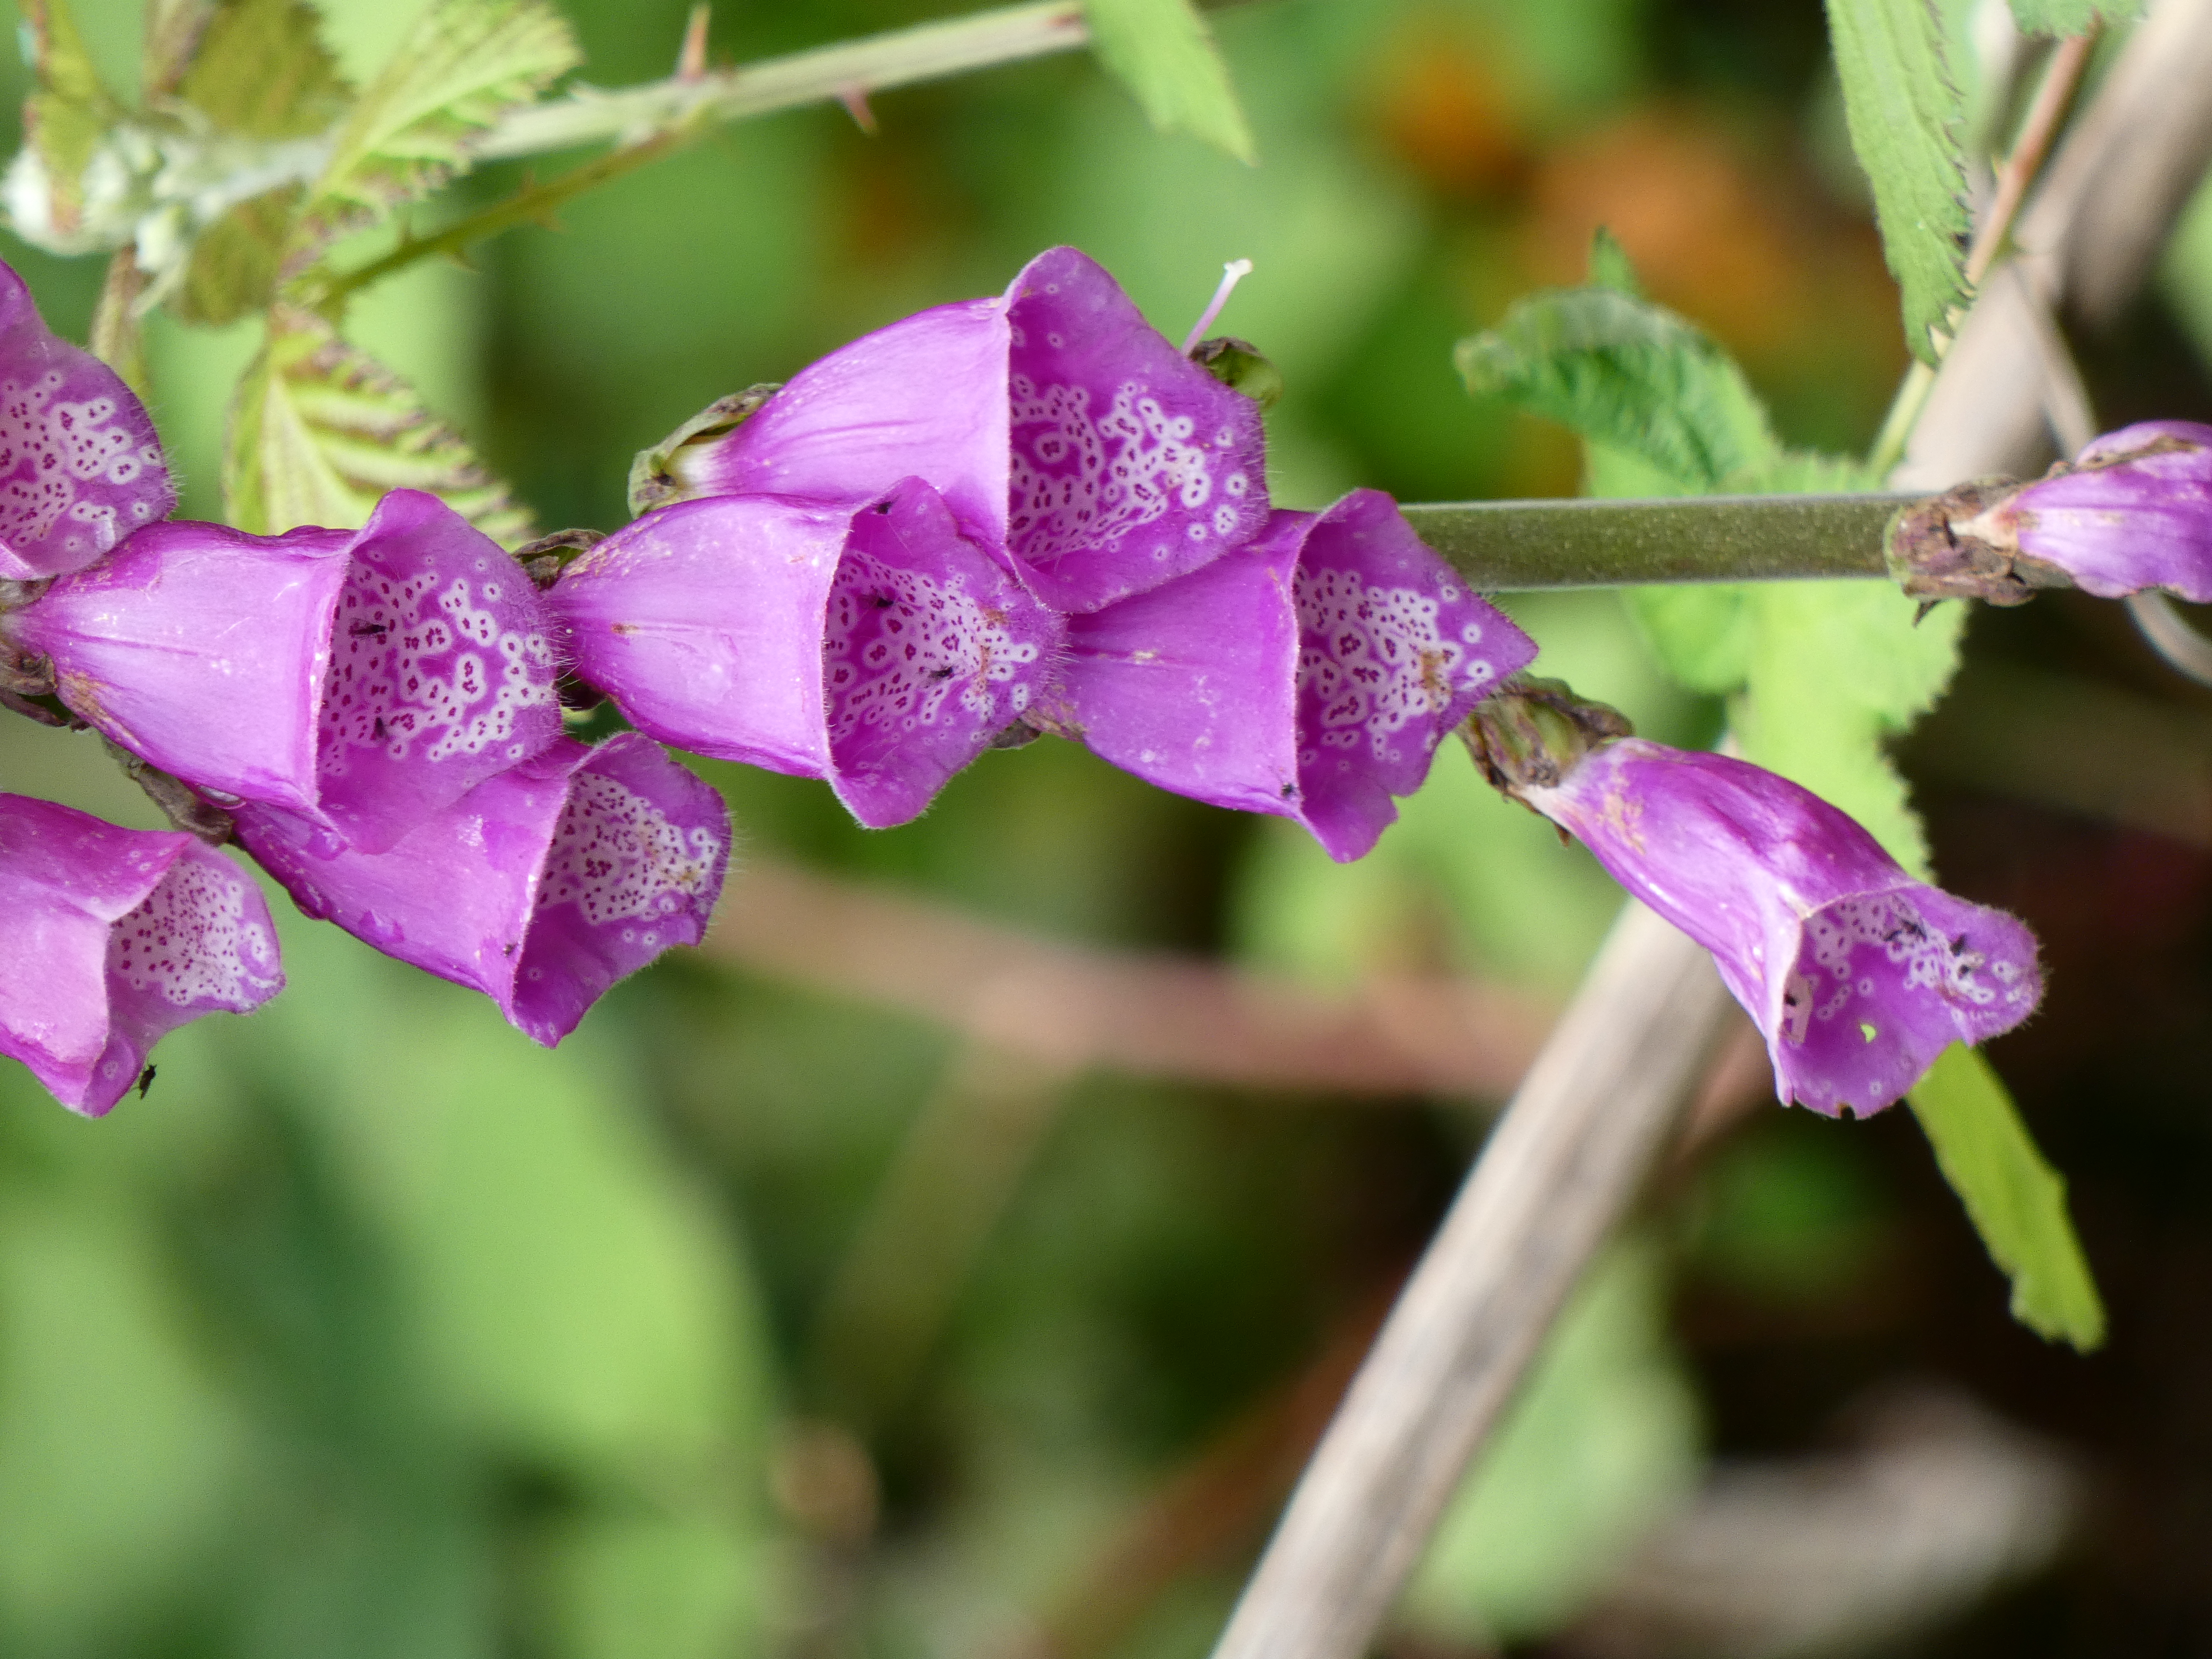 A foxglove inflorescence with bell-shaped, purple flowers. The entrance to the flower has a speckled landing pad. 